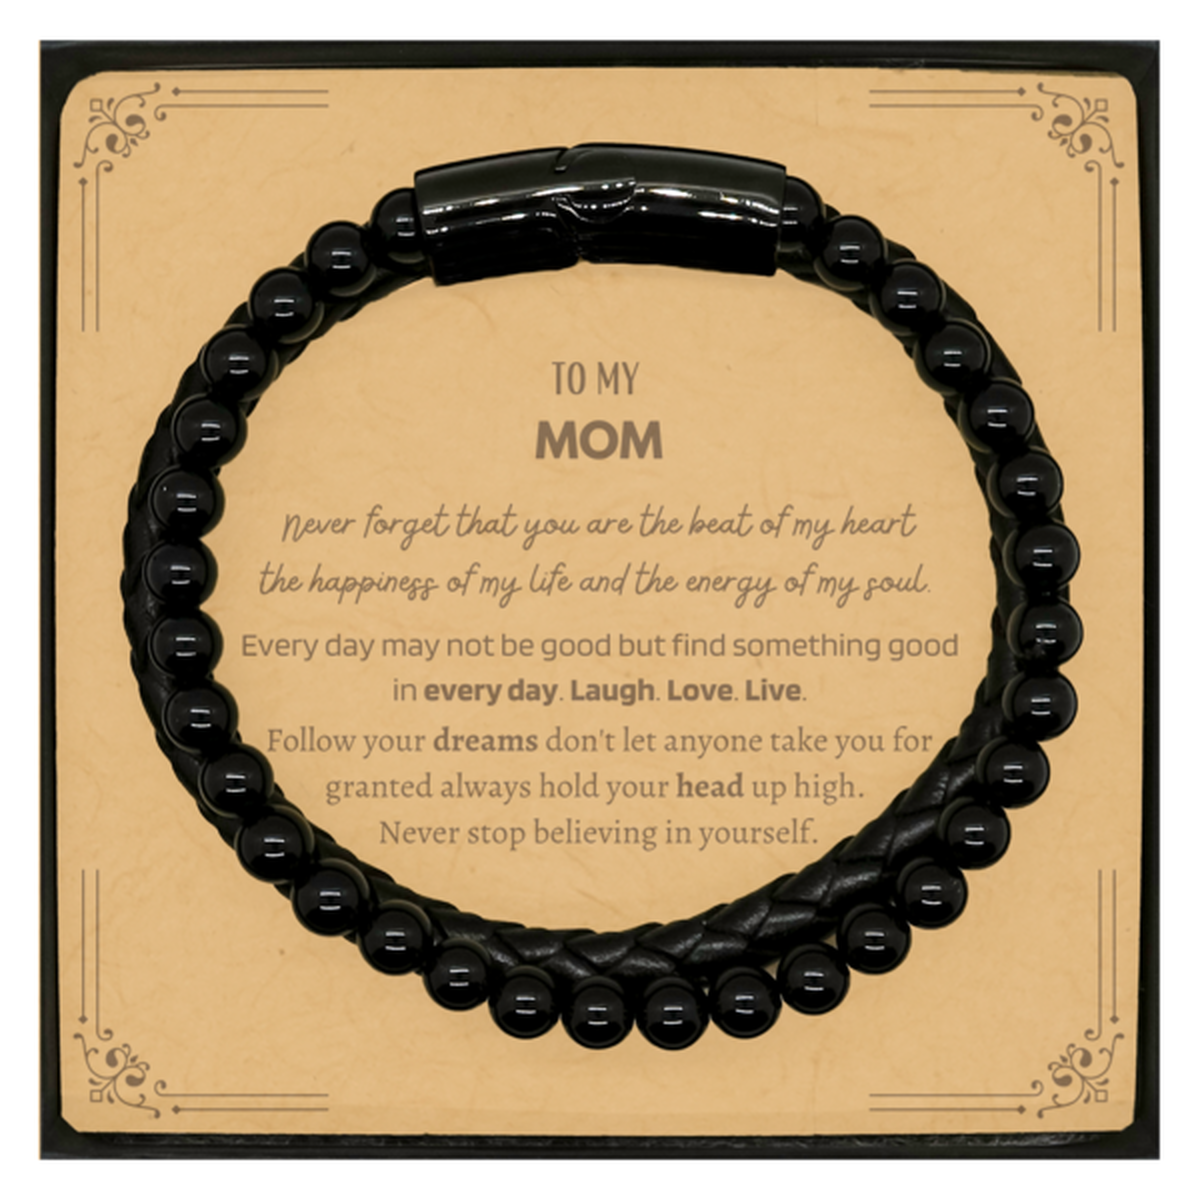 To My Mom Message Card Gifts, Christmas Mom Stone Leather Bracelets Present, Birthday Unique Motivational For Mom, To My Mom Never forget that you are the beat of my heart the happiness of my life and the energy of my soul